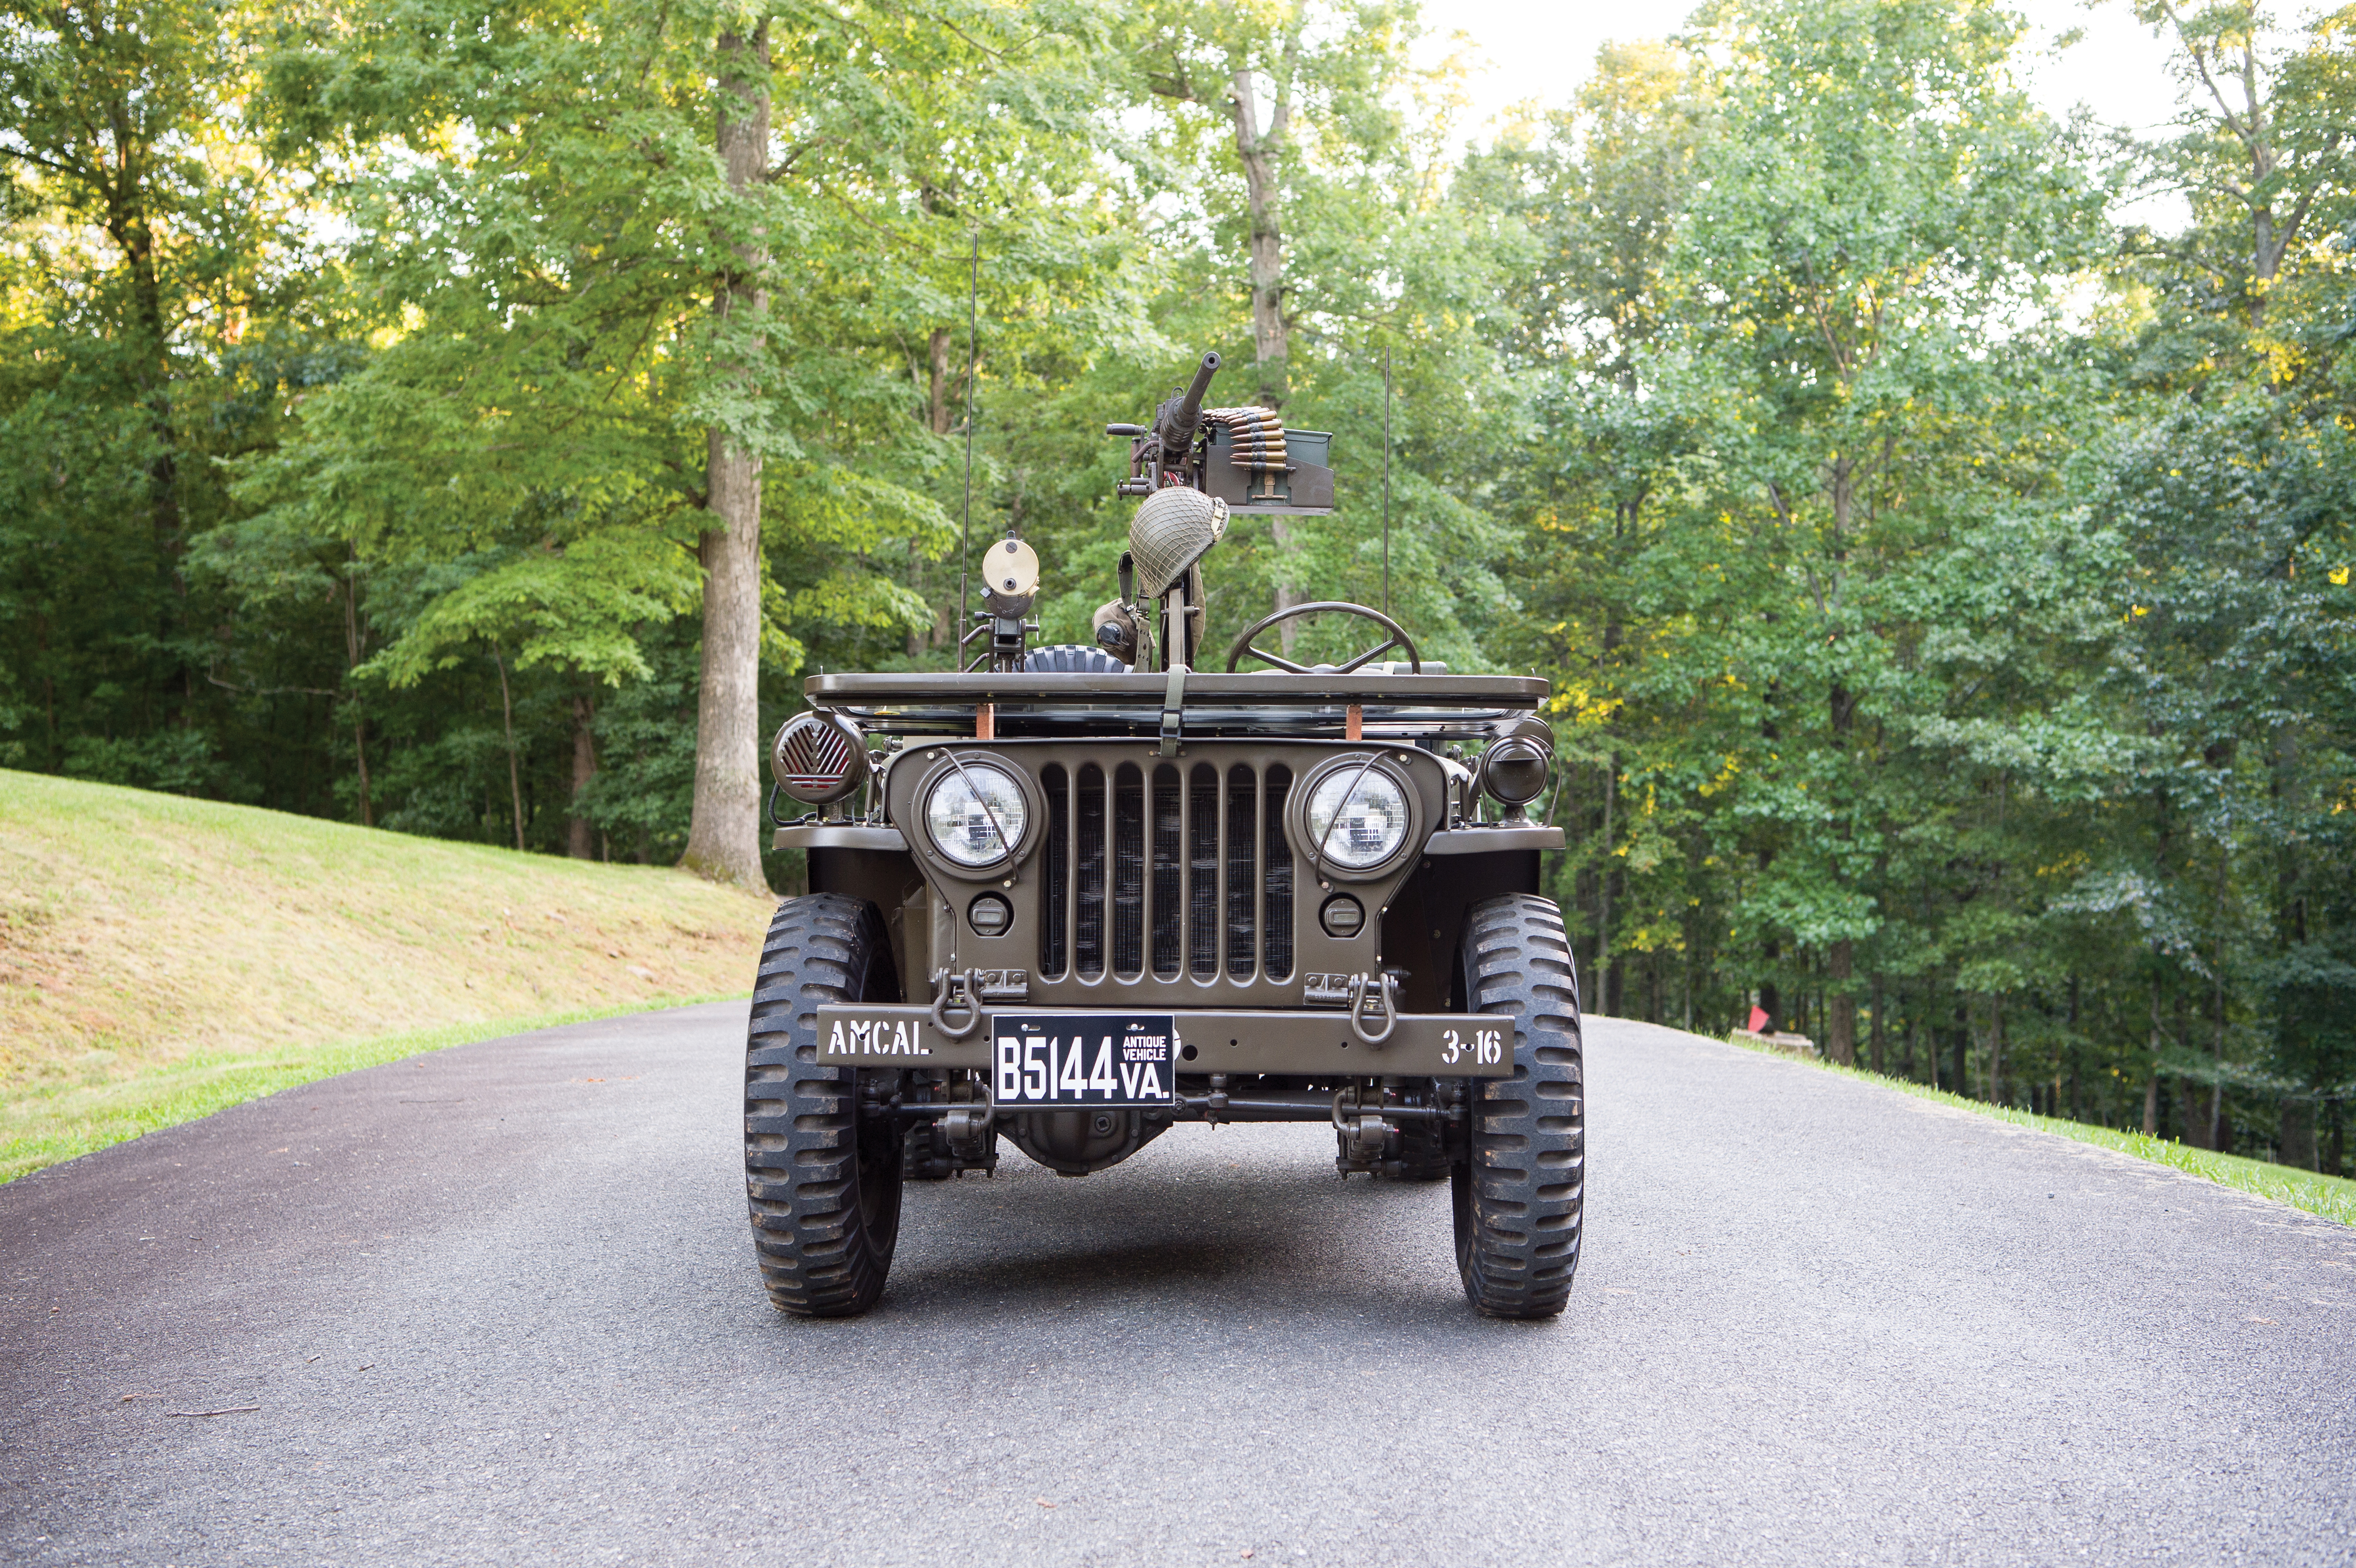 1953 willys-overland m38a1 1/4 ton